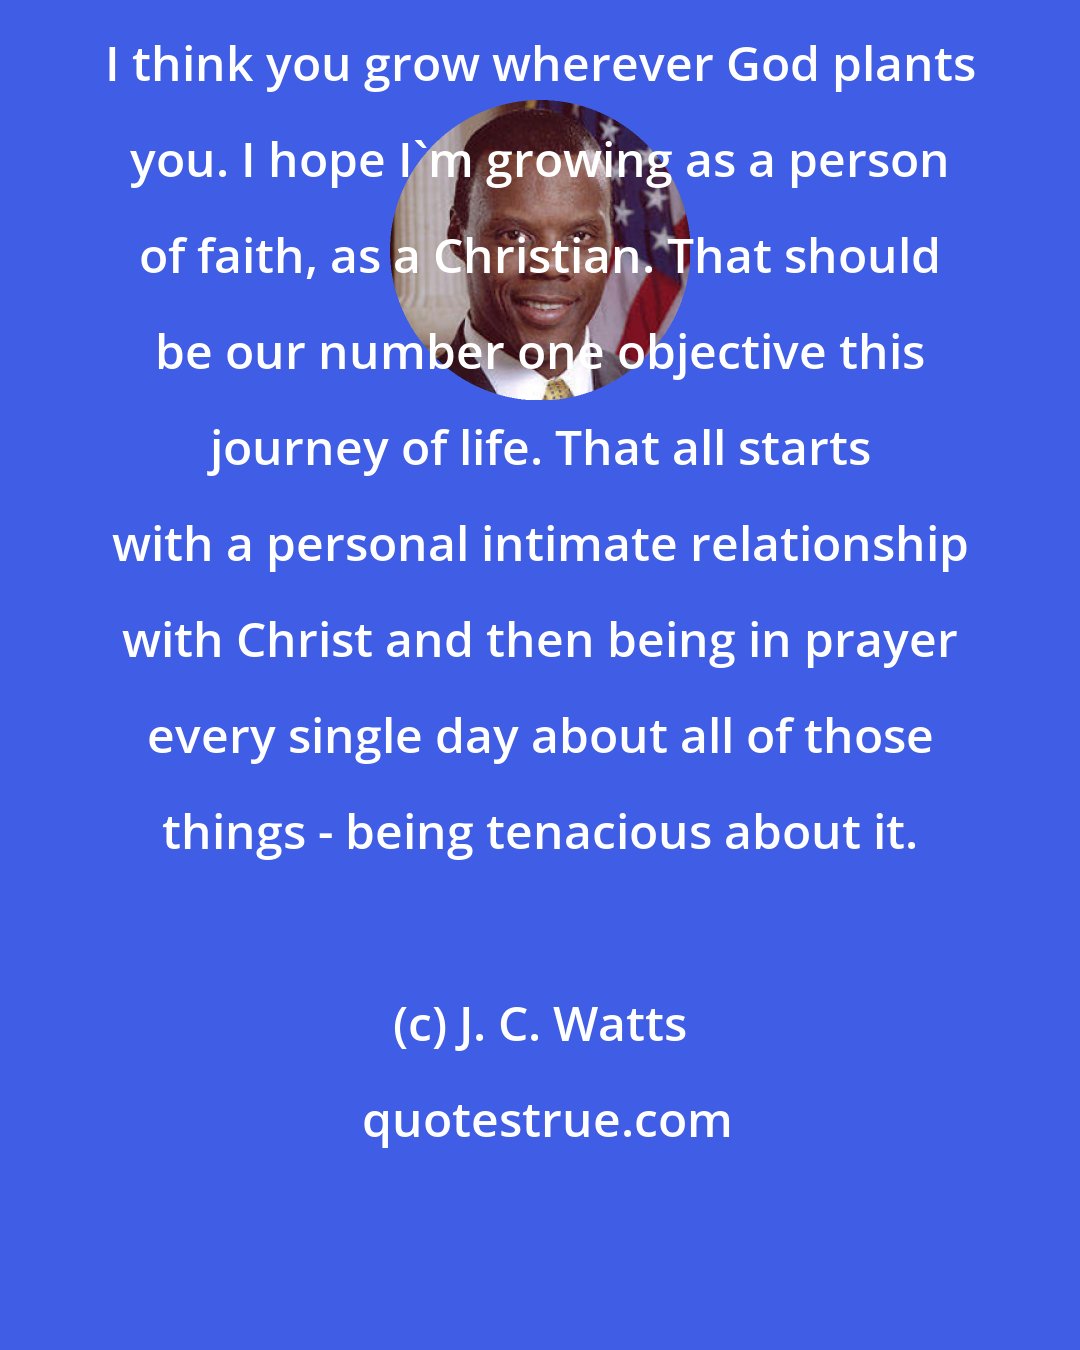 J. C. Watts: I think you grow wherever God plants you. I hope I'm growing as a person of faith, as a Christian. That should be our number one objective this journey of life. That all starts with a personal intimate relationship with Christ and then being in prayer every single day about all of those things - being tenacious about it.